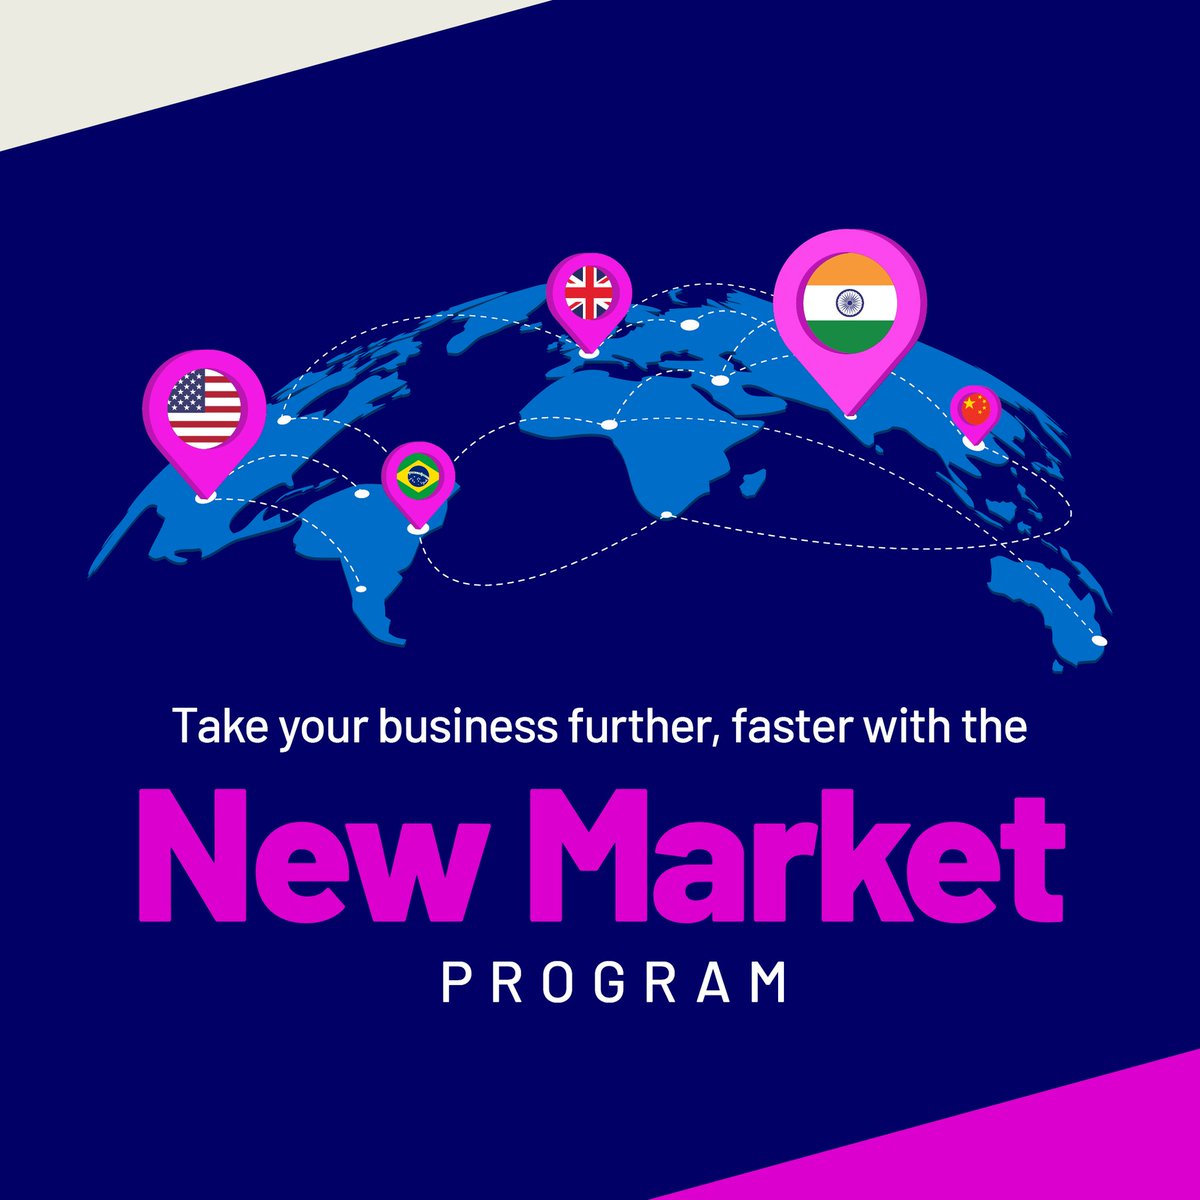 Take your business to new overseas markets with our New Market Program with matched funding grants of up to $25,000. Applications are open now! bit.ly/3xa1aSU